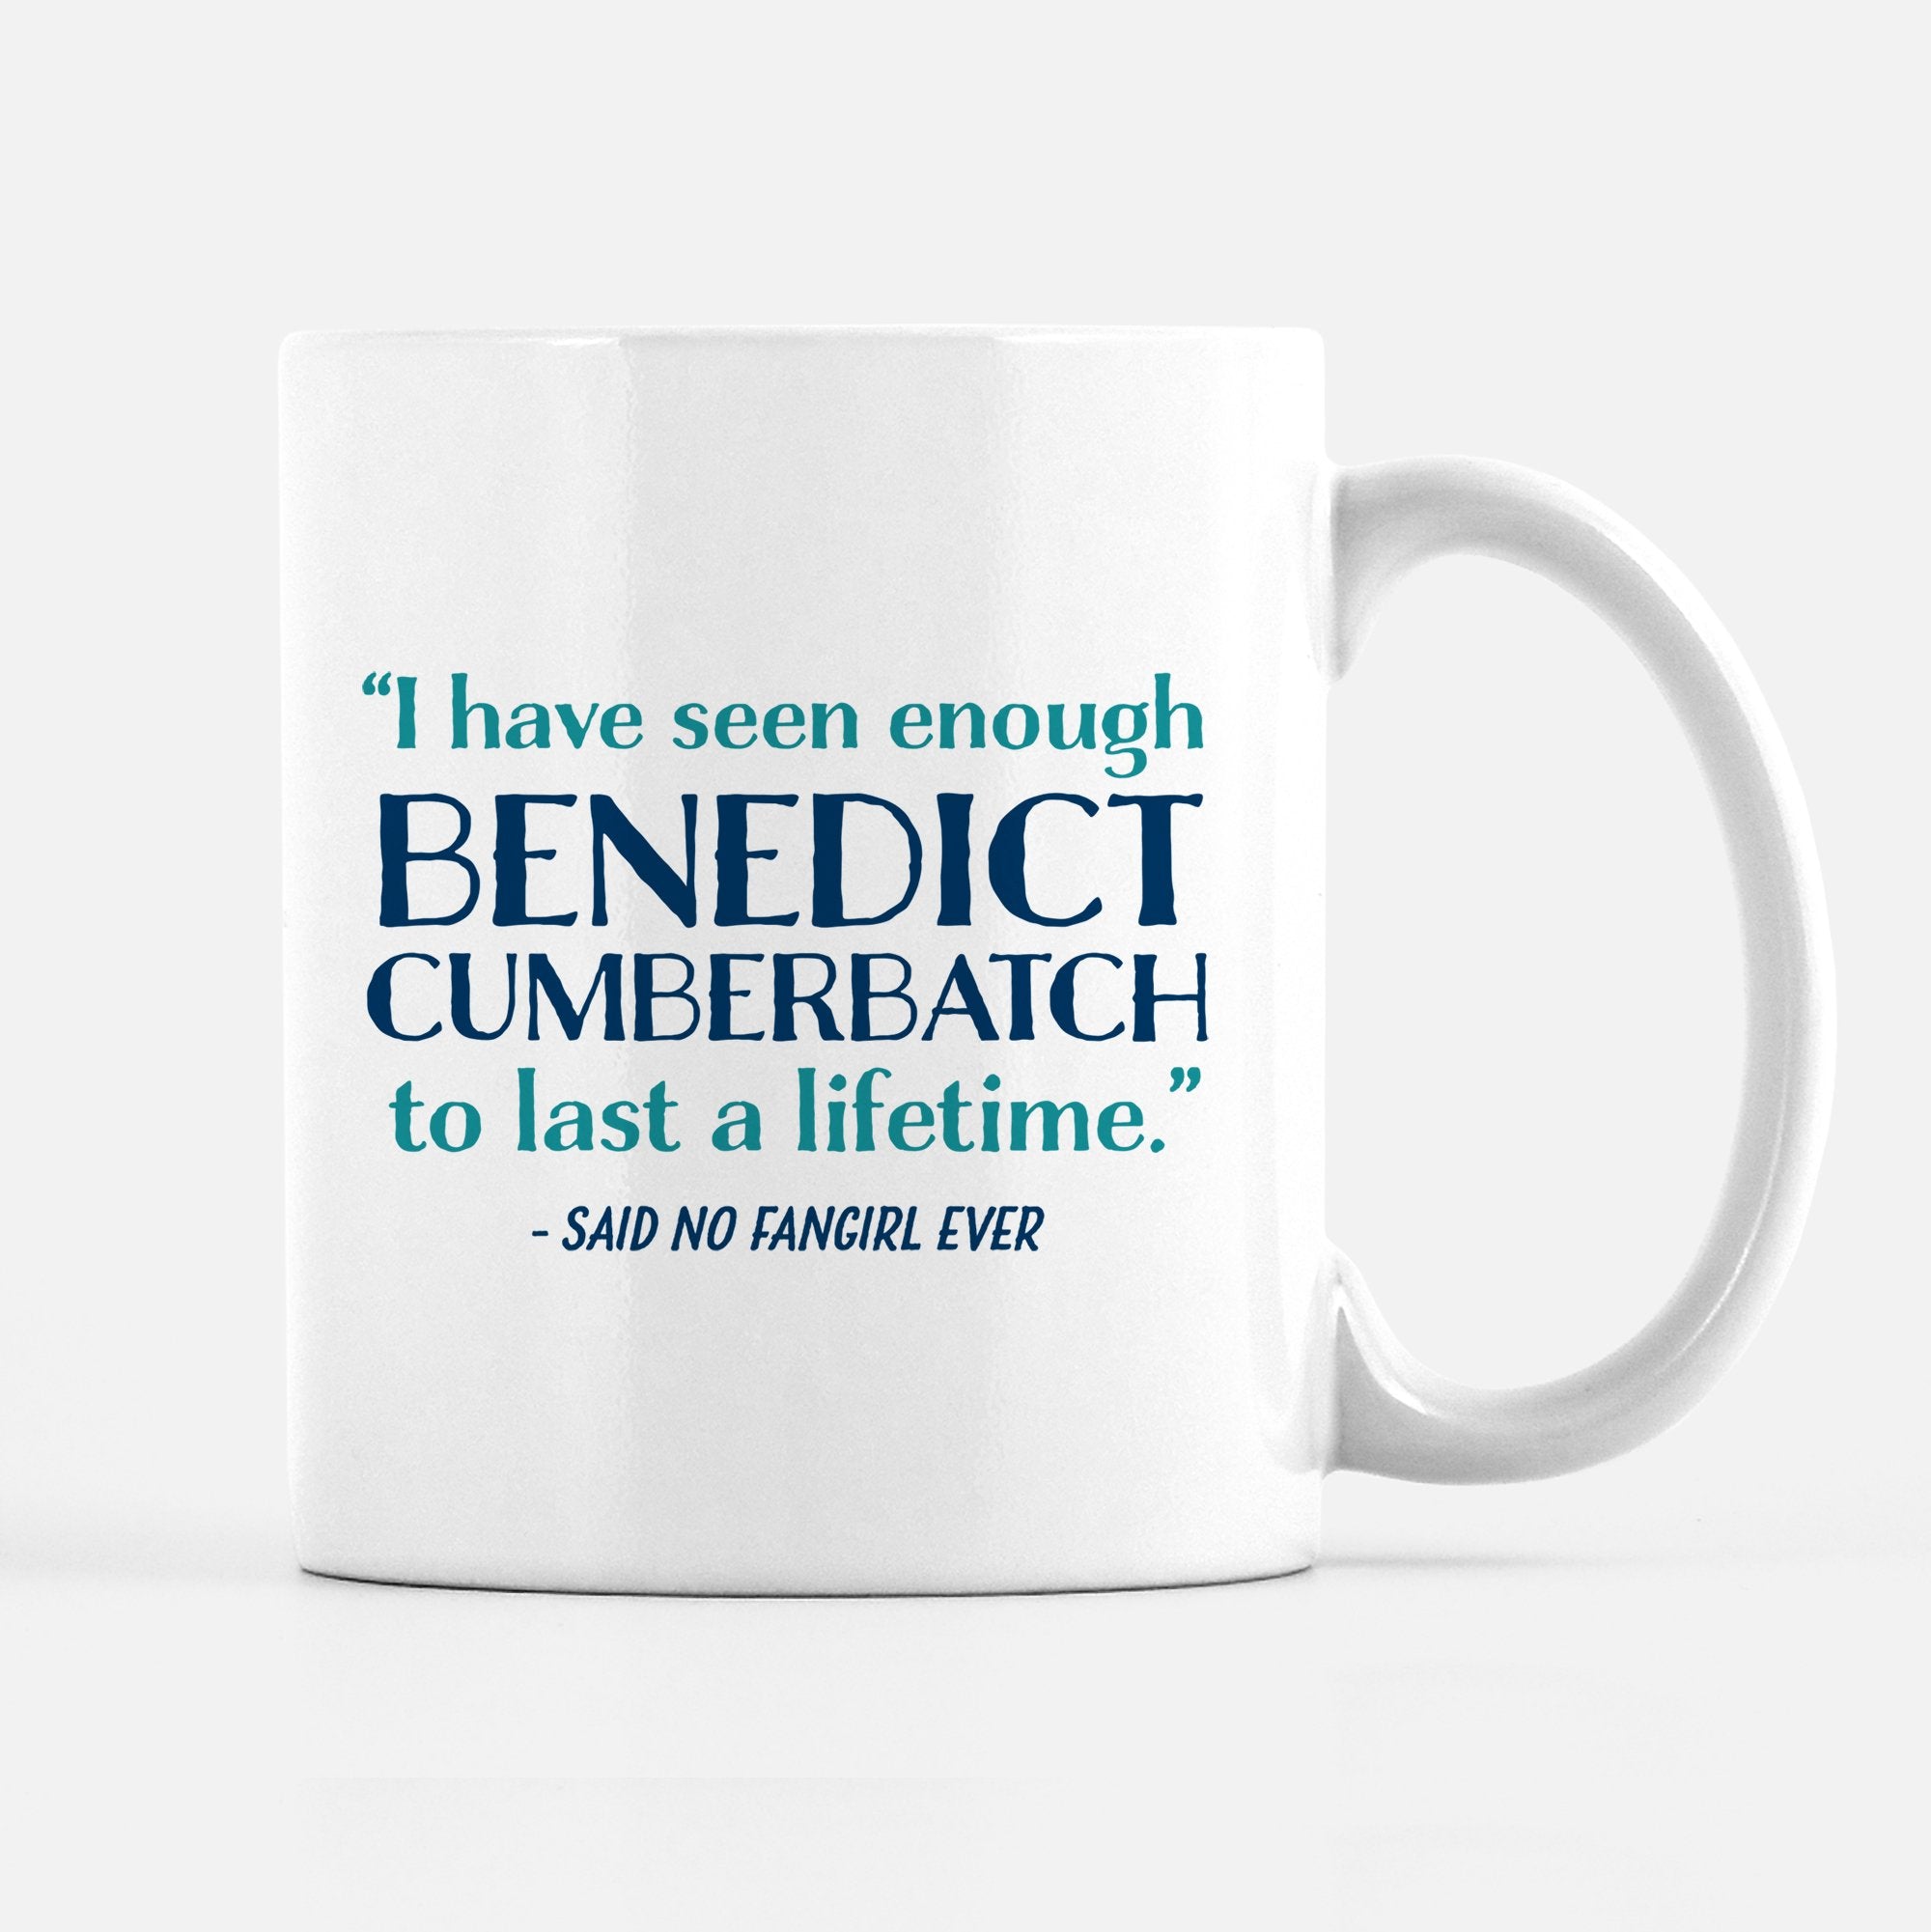 I have seen enough of Benedict Cumberbatch to last a lifetime - said no fan girl ever, PIPSY.COM mug